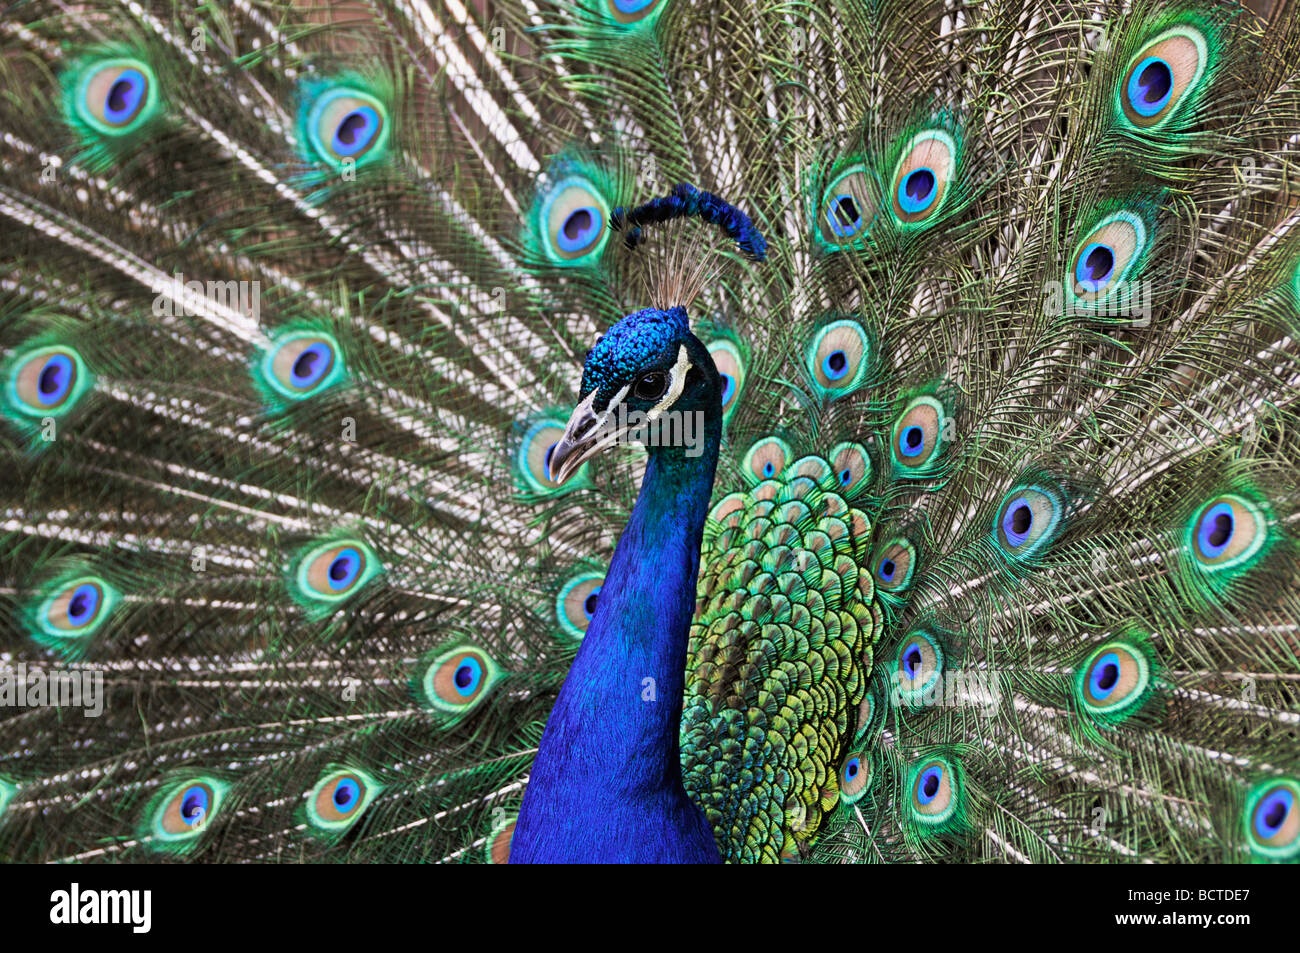 Pavo cristatus (paons indiens), Peacock Banque D'Images